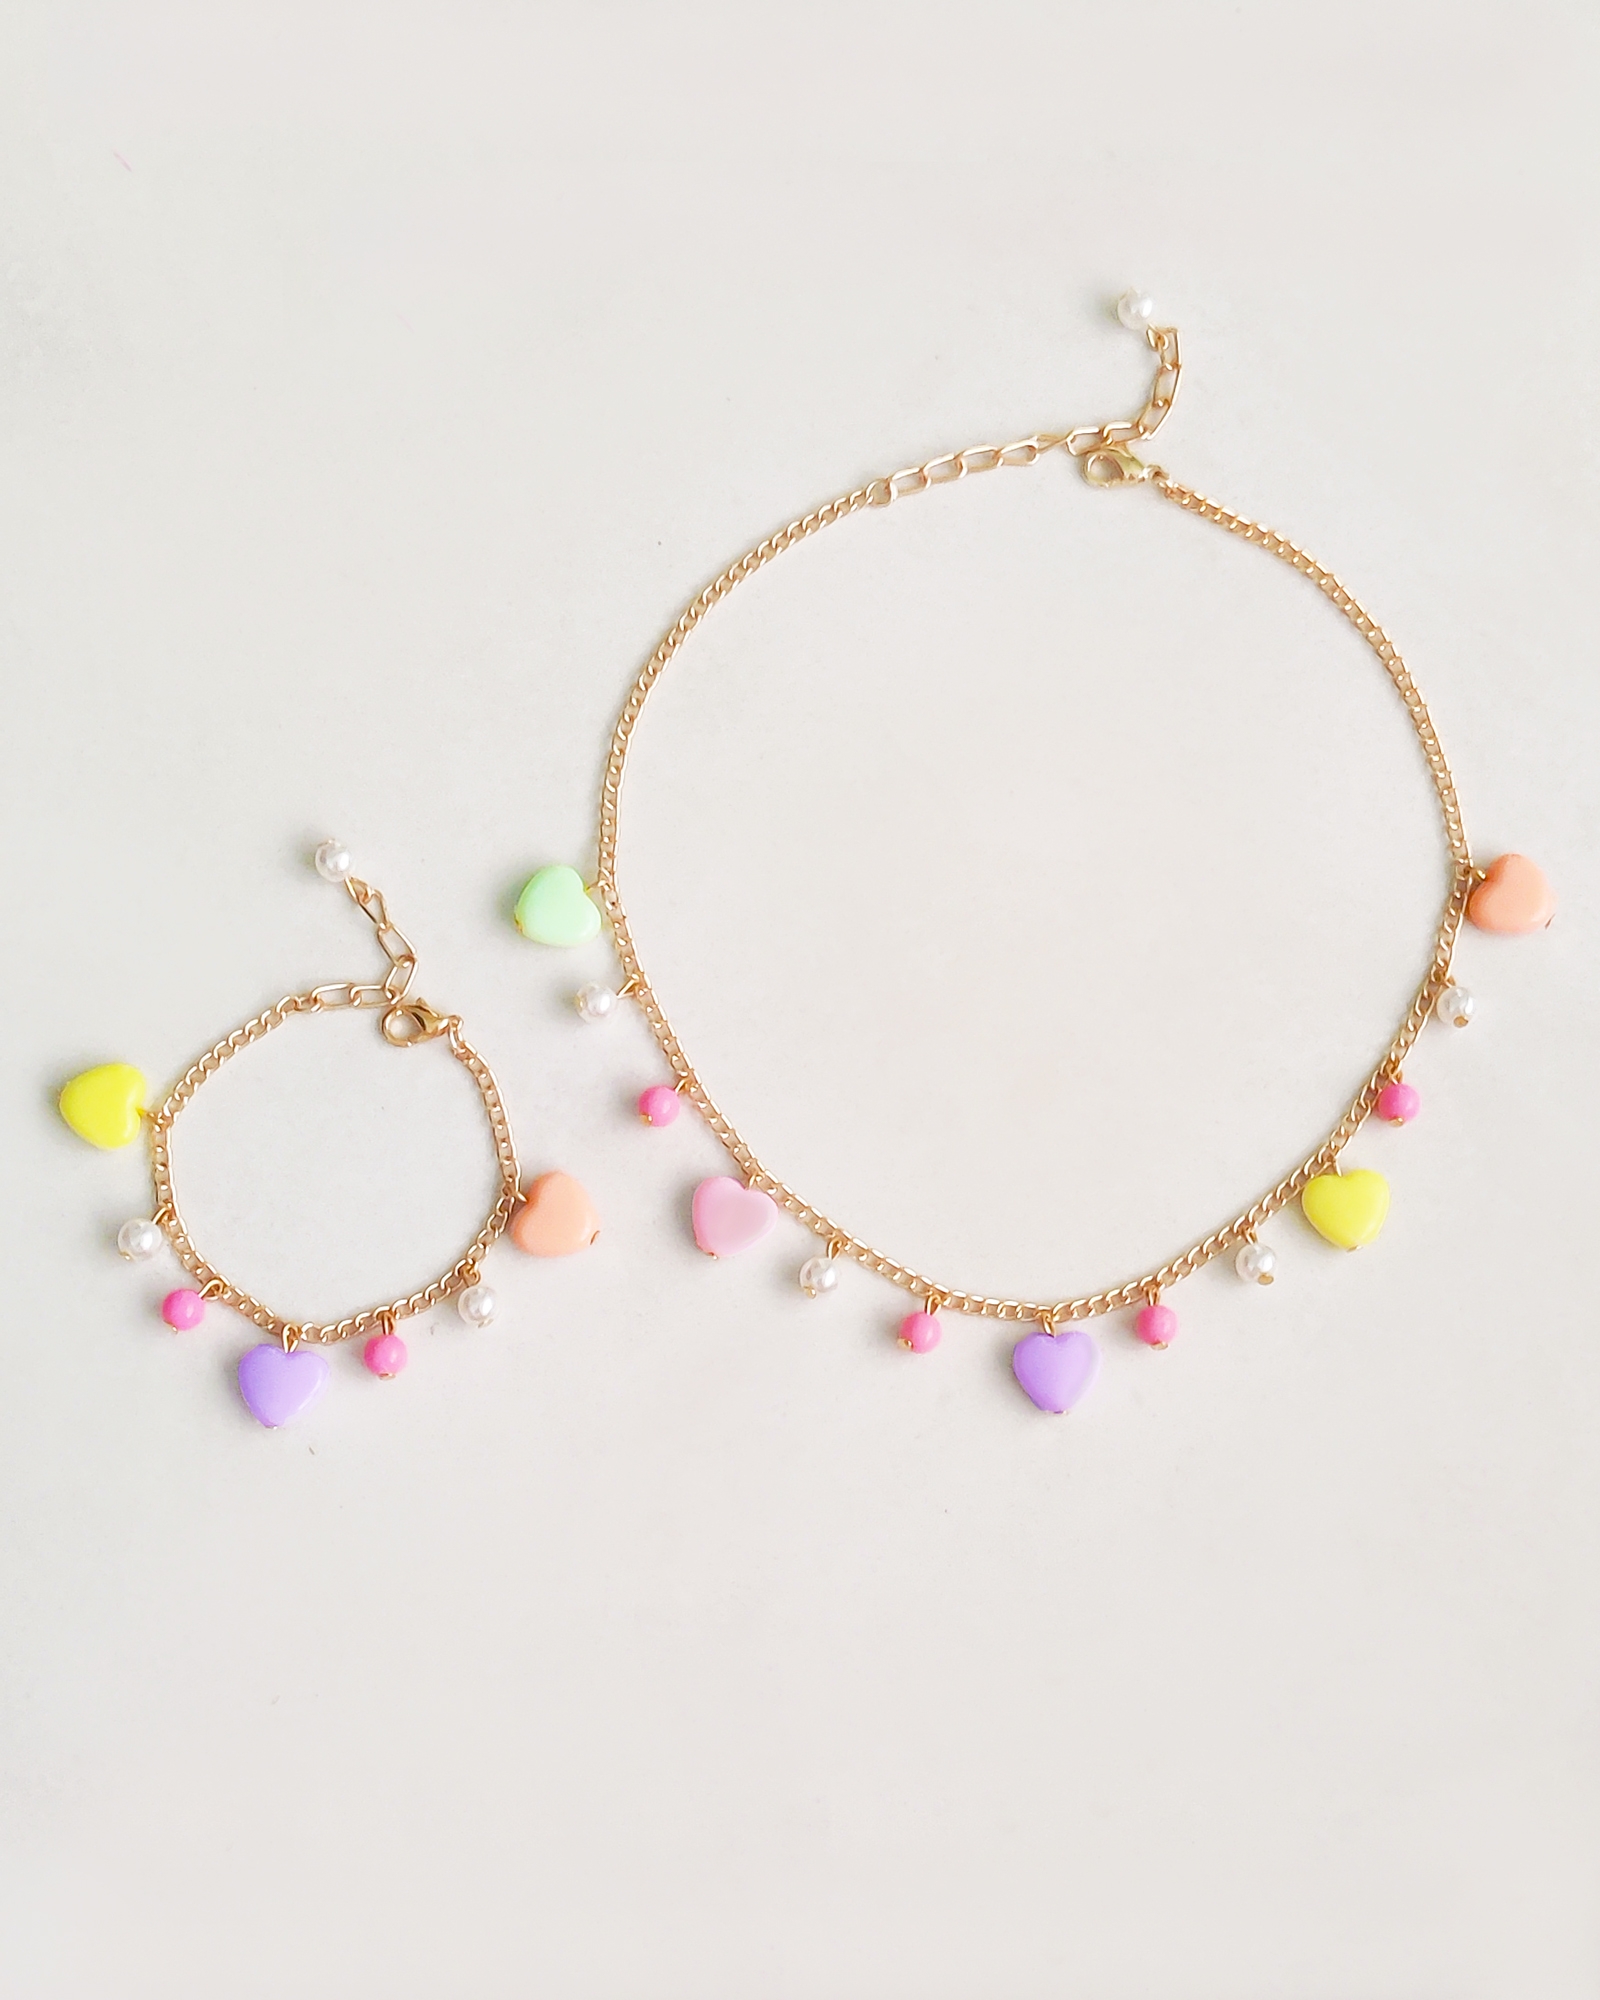 Hearts Delight Necklace, Bracelet Set - Pink, Yellow, Lilac